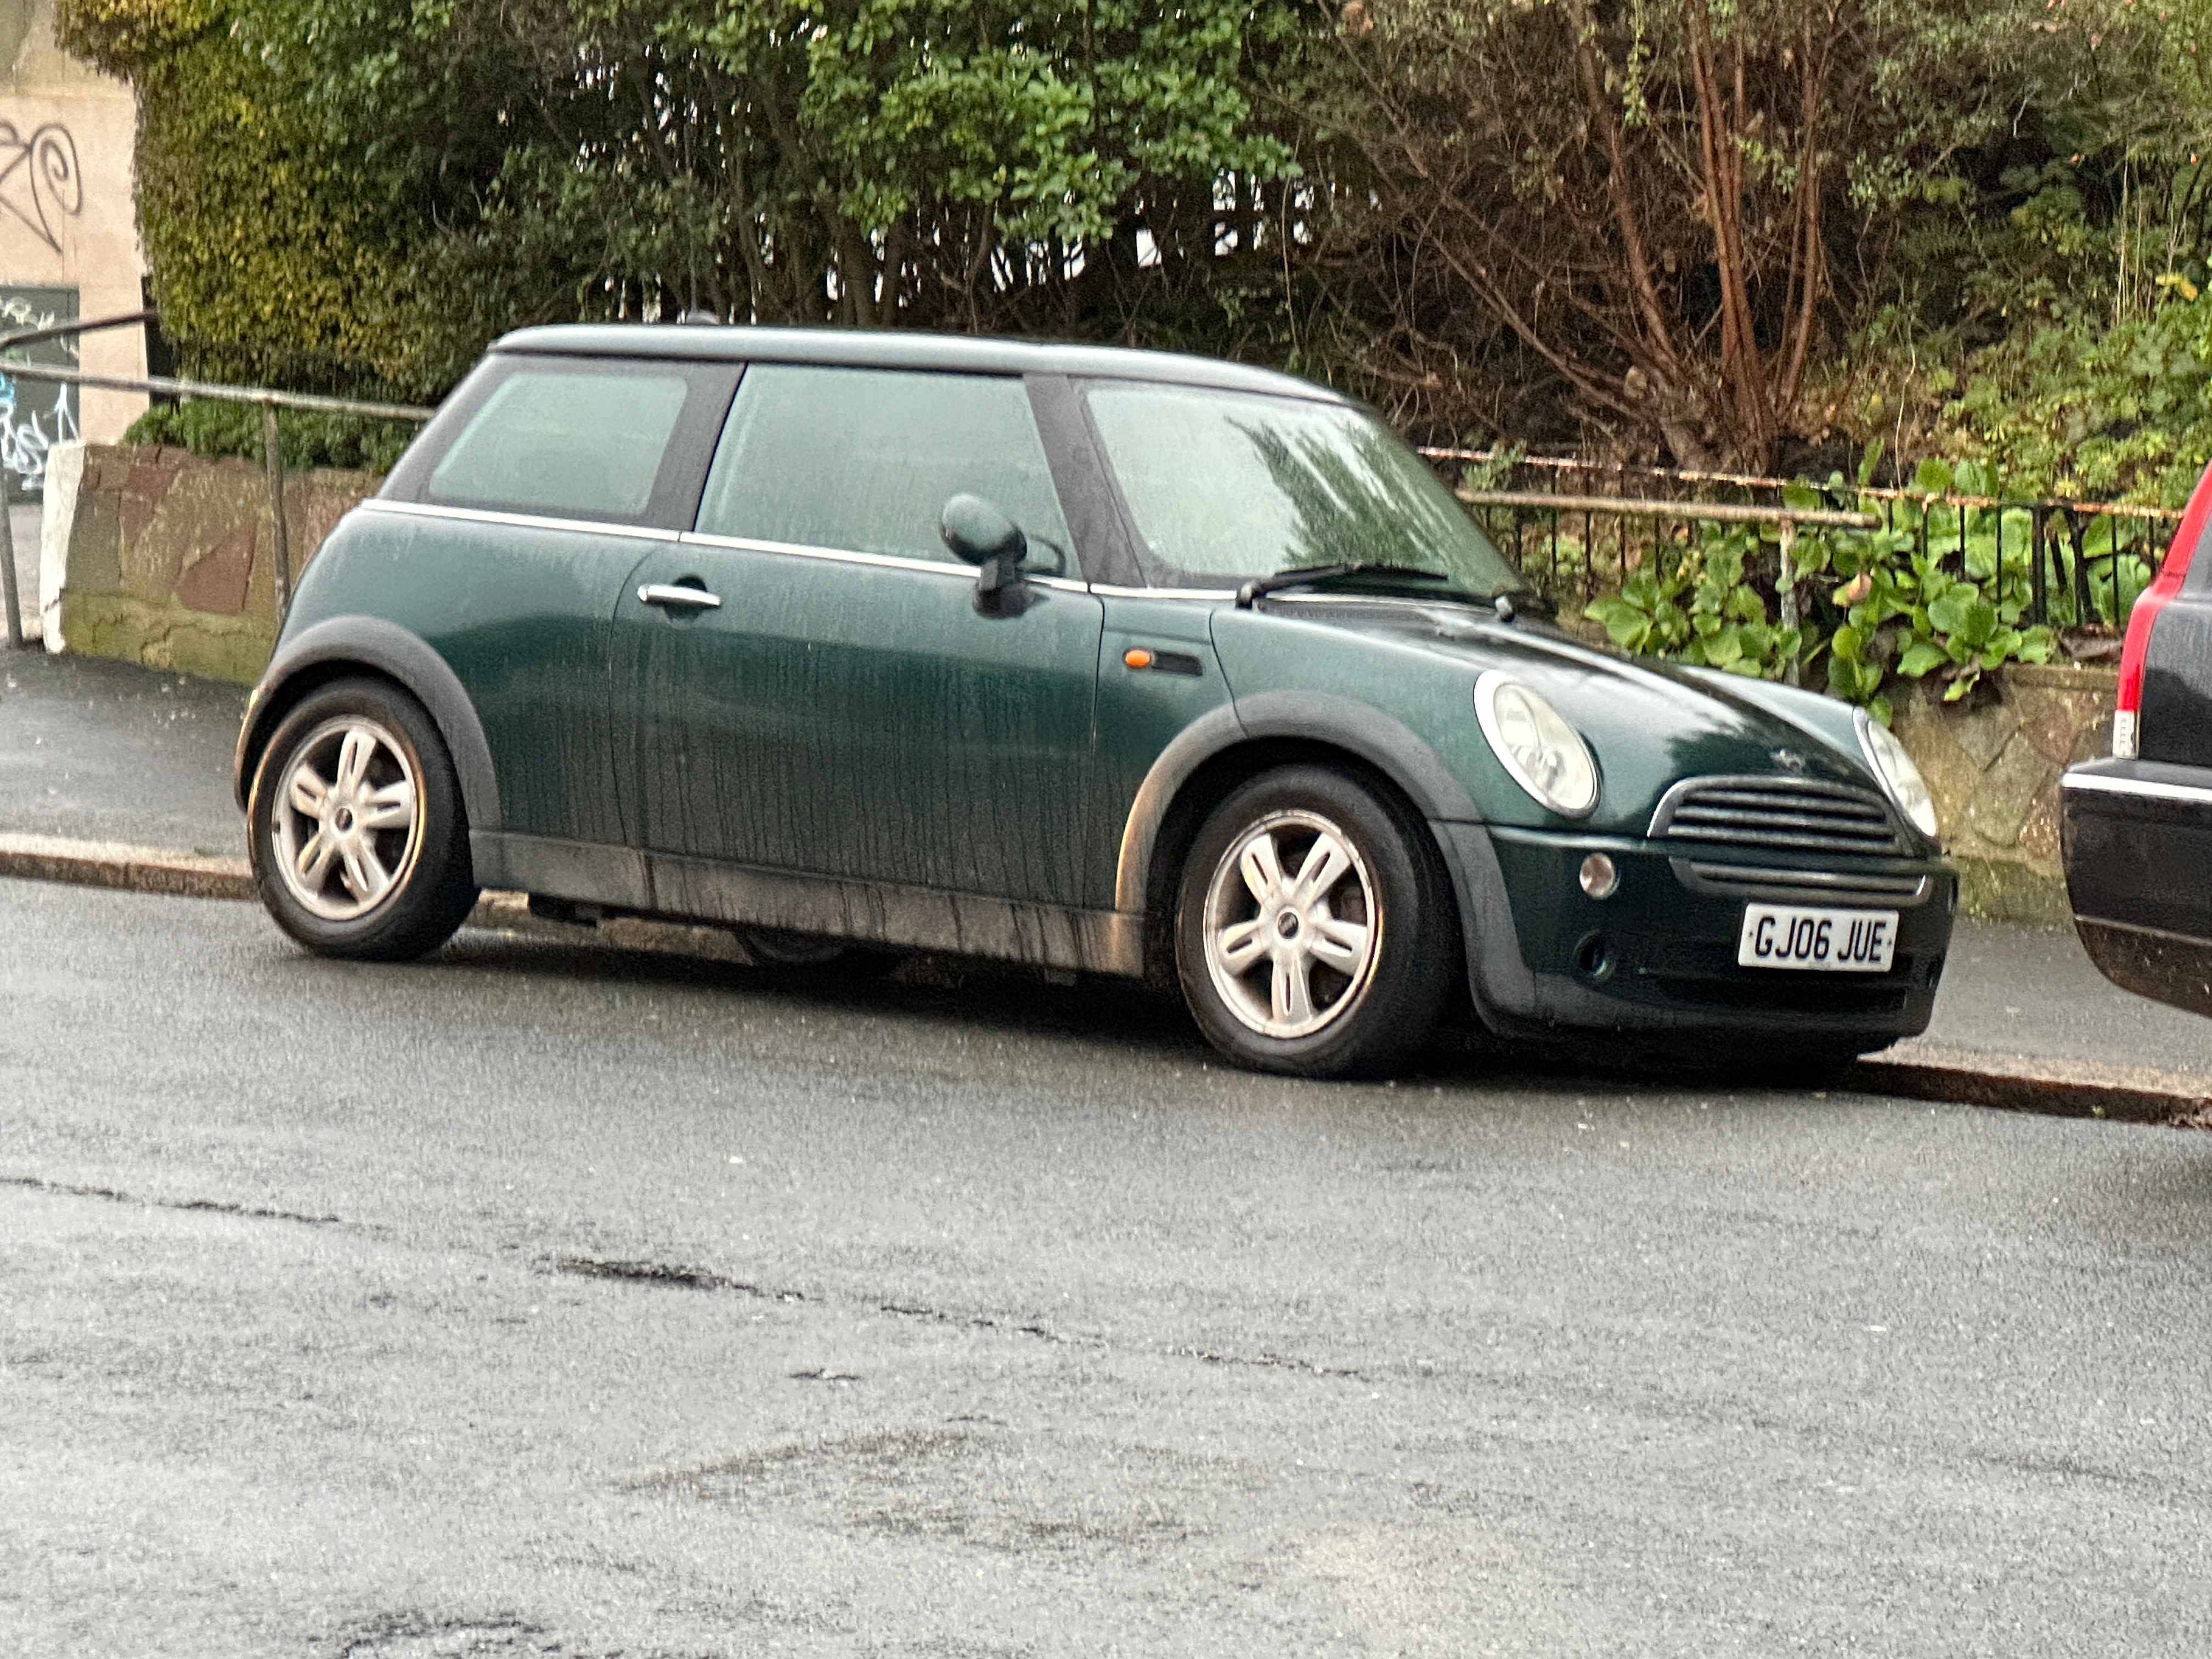 Photograph of GL06 JUE - a Green Mini Cooper parked in Hollingdean by a non-resident. The fifth of seven photographs supplied by the residents of Hollingdean.